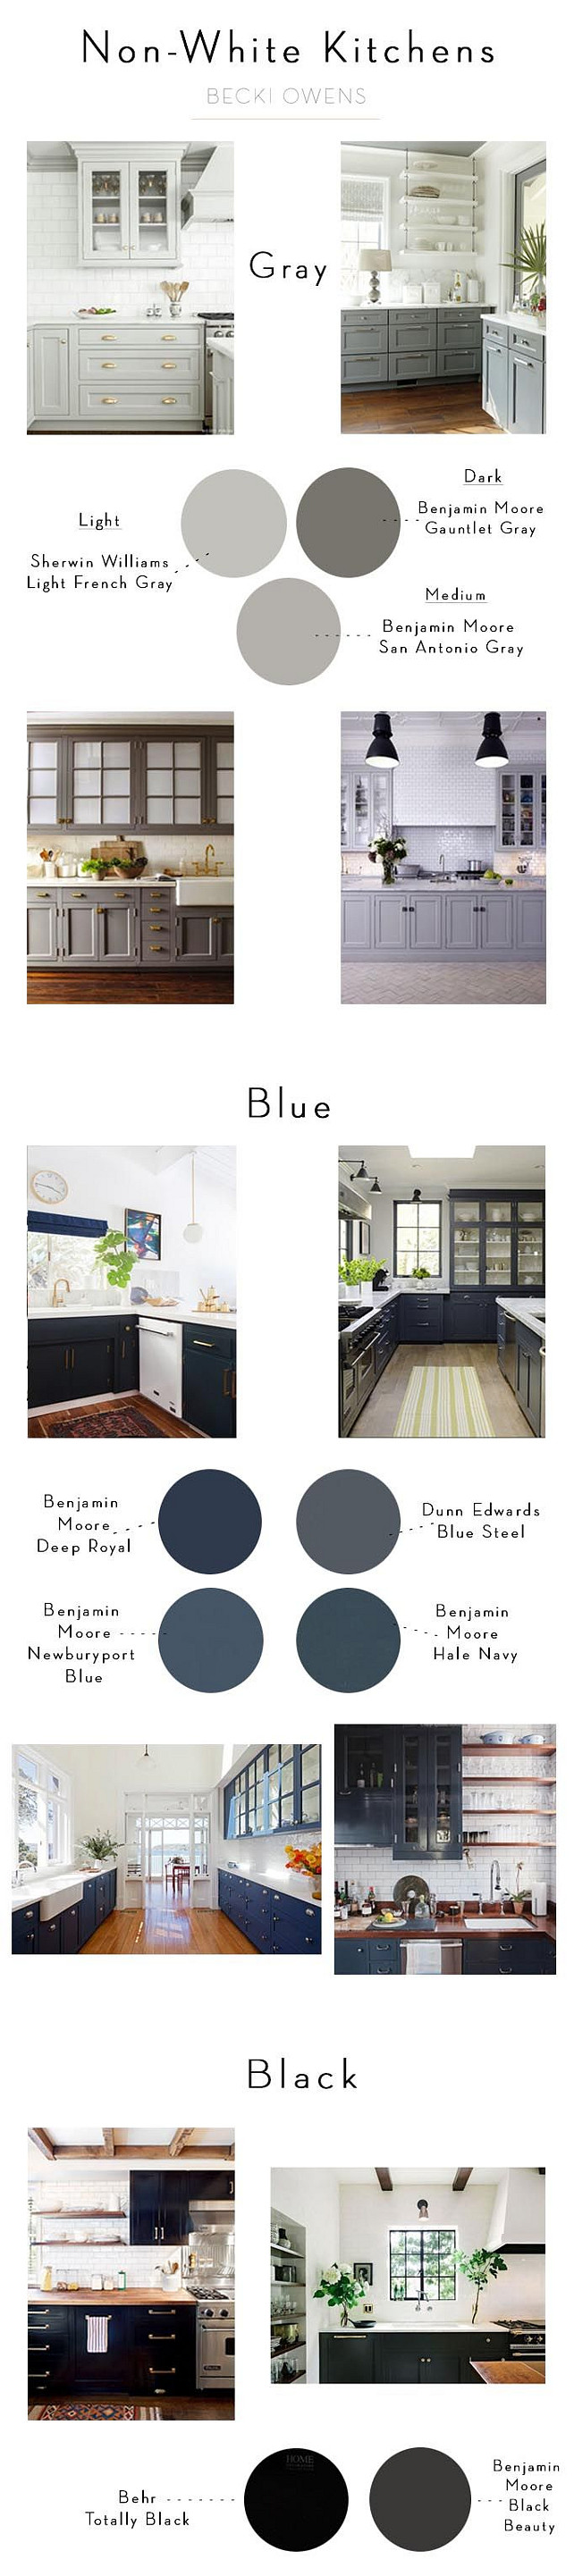 Non-White Kitchen Paint Color. Non-White Kitchen Paint Color Suggestions. Non-White Kitchen Paint Color Ideas. #NonWhiteKitchenPaintColor Gray Kitchen Paint Color: Light Gray Paint Color: Light French Gray by Sherwing Williams. Medium Gray Paint Color: San Antonio Gray by Benjamin Moore. Dark Gray Paint Color: Gauntlet Gray by Benjamin Moore. Navy Kitchen Paint Color: Deep Royal by Benjamin Moore. Newburyport Blue by Benjamin Moore. Hale Navy by Benjamin Moore. Blue Steel Dunn Edwards. Black Kitchen Paint Color: Totally Black by Behr. Black Beauty by Benjamin Moore. Becki Owens.